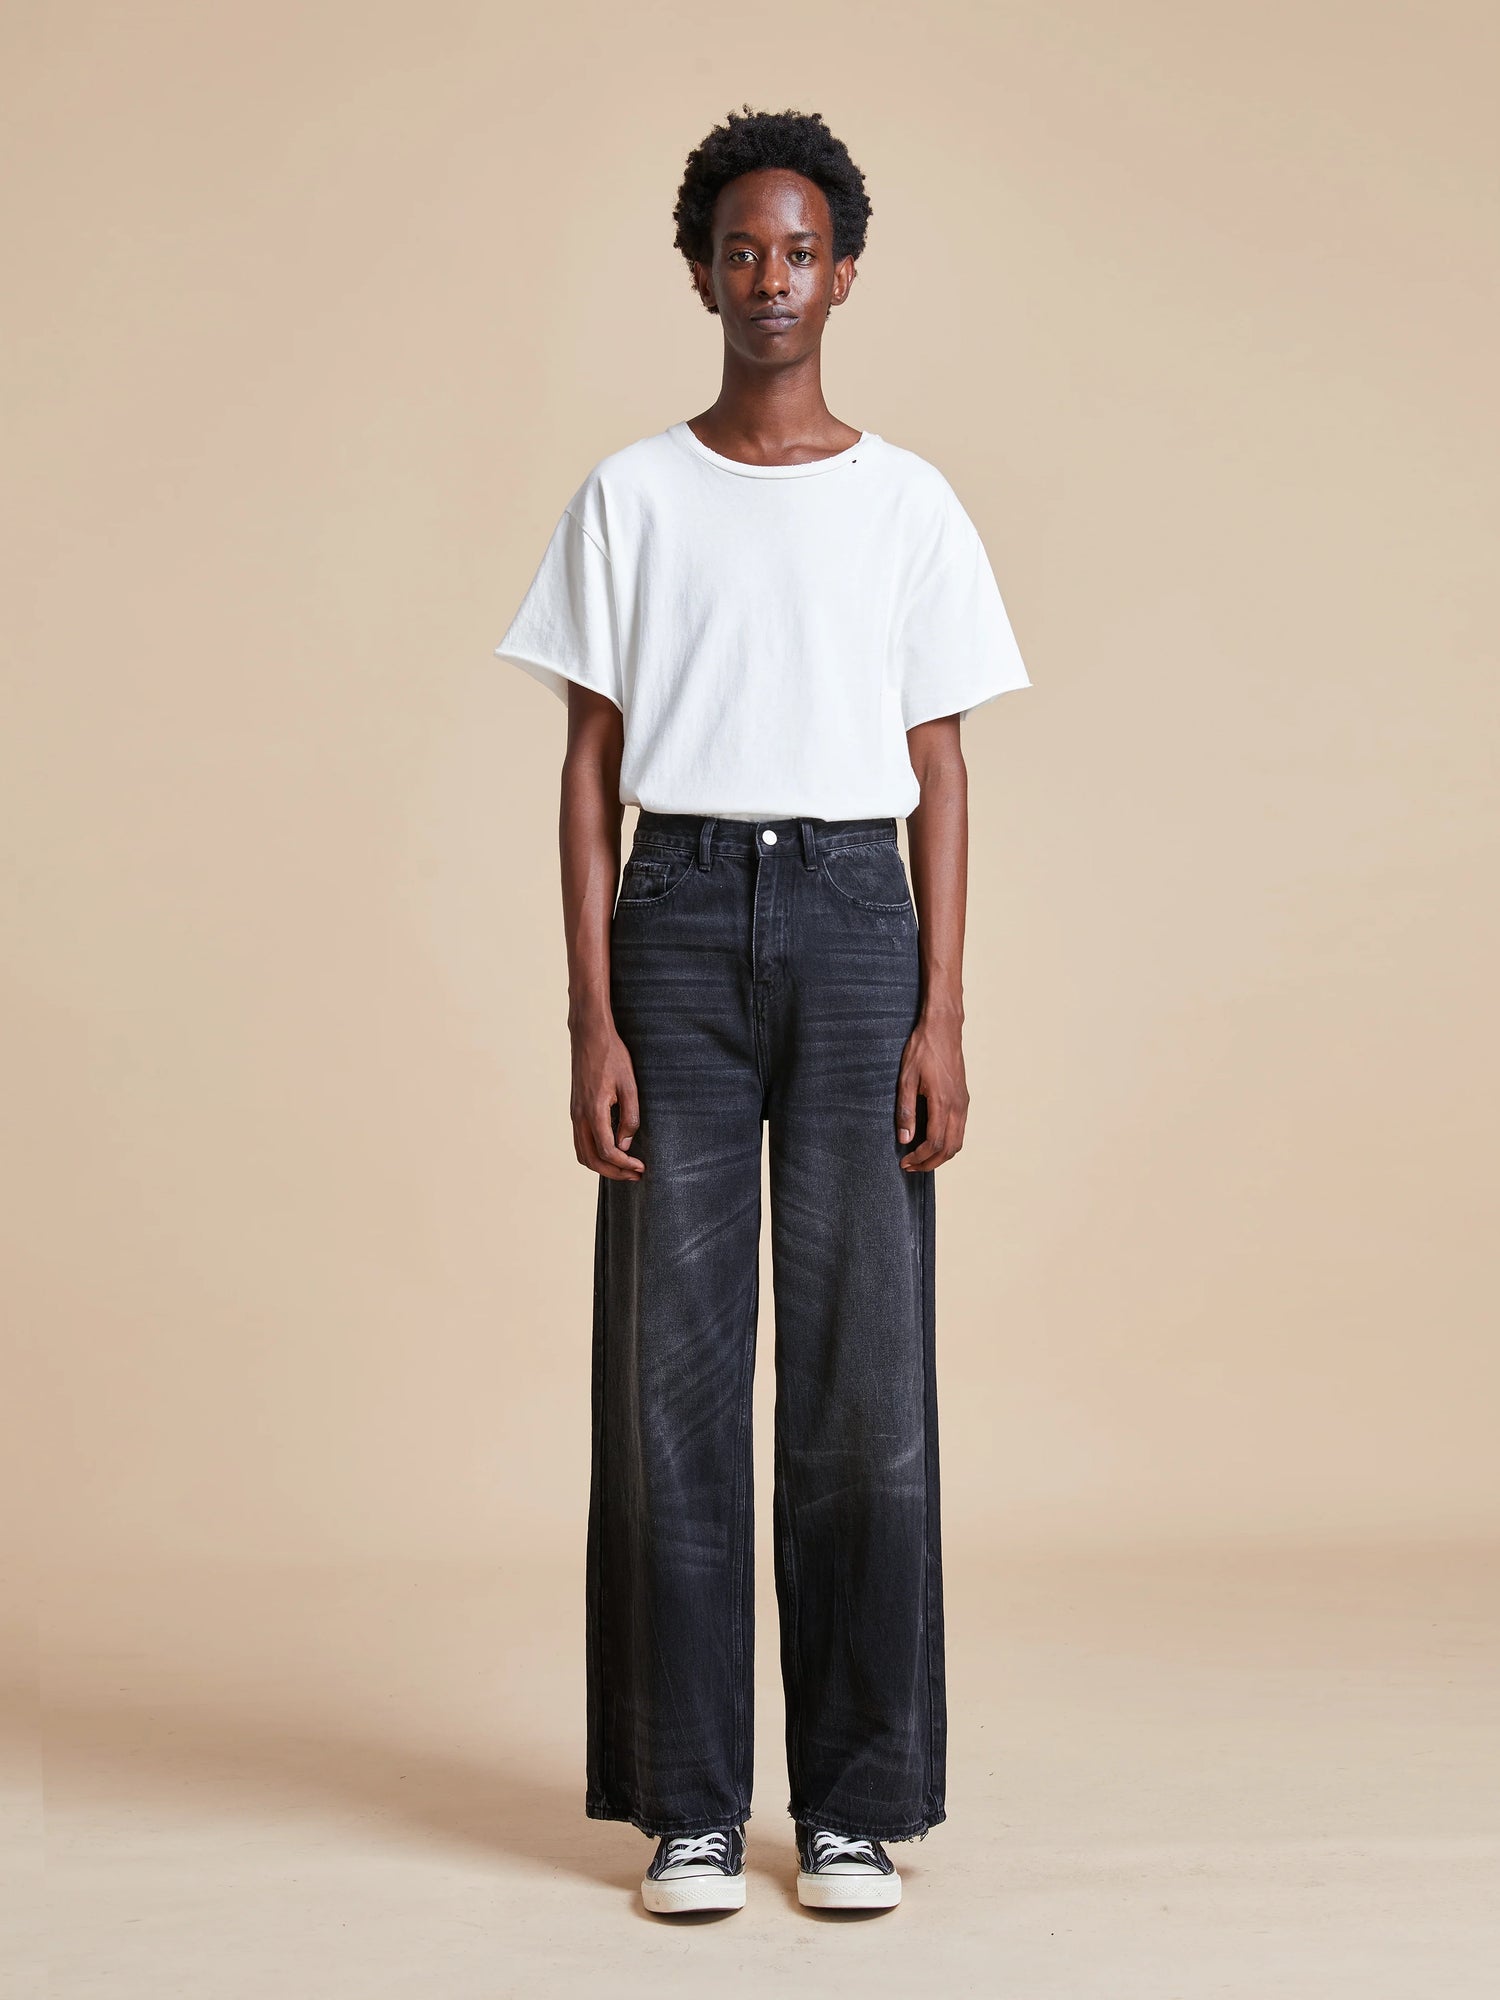 A model wearing Found Lacy Baggy Jeans Vintage Black with distressed hems and a white t-shirt.